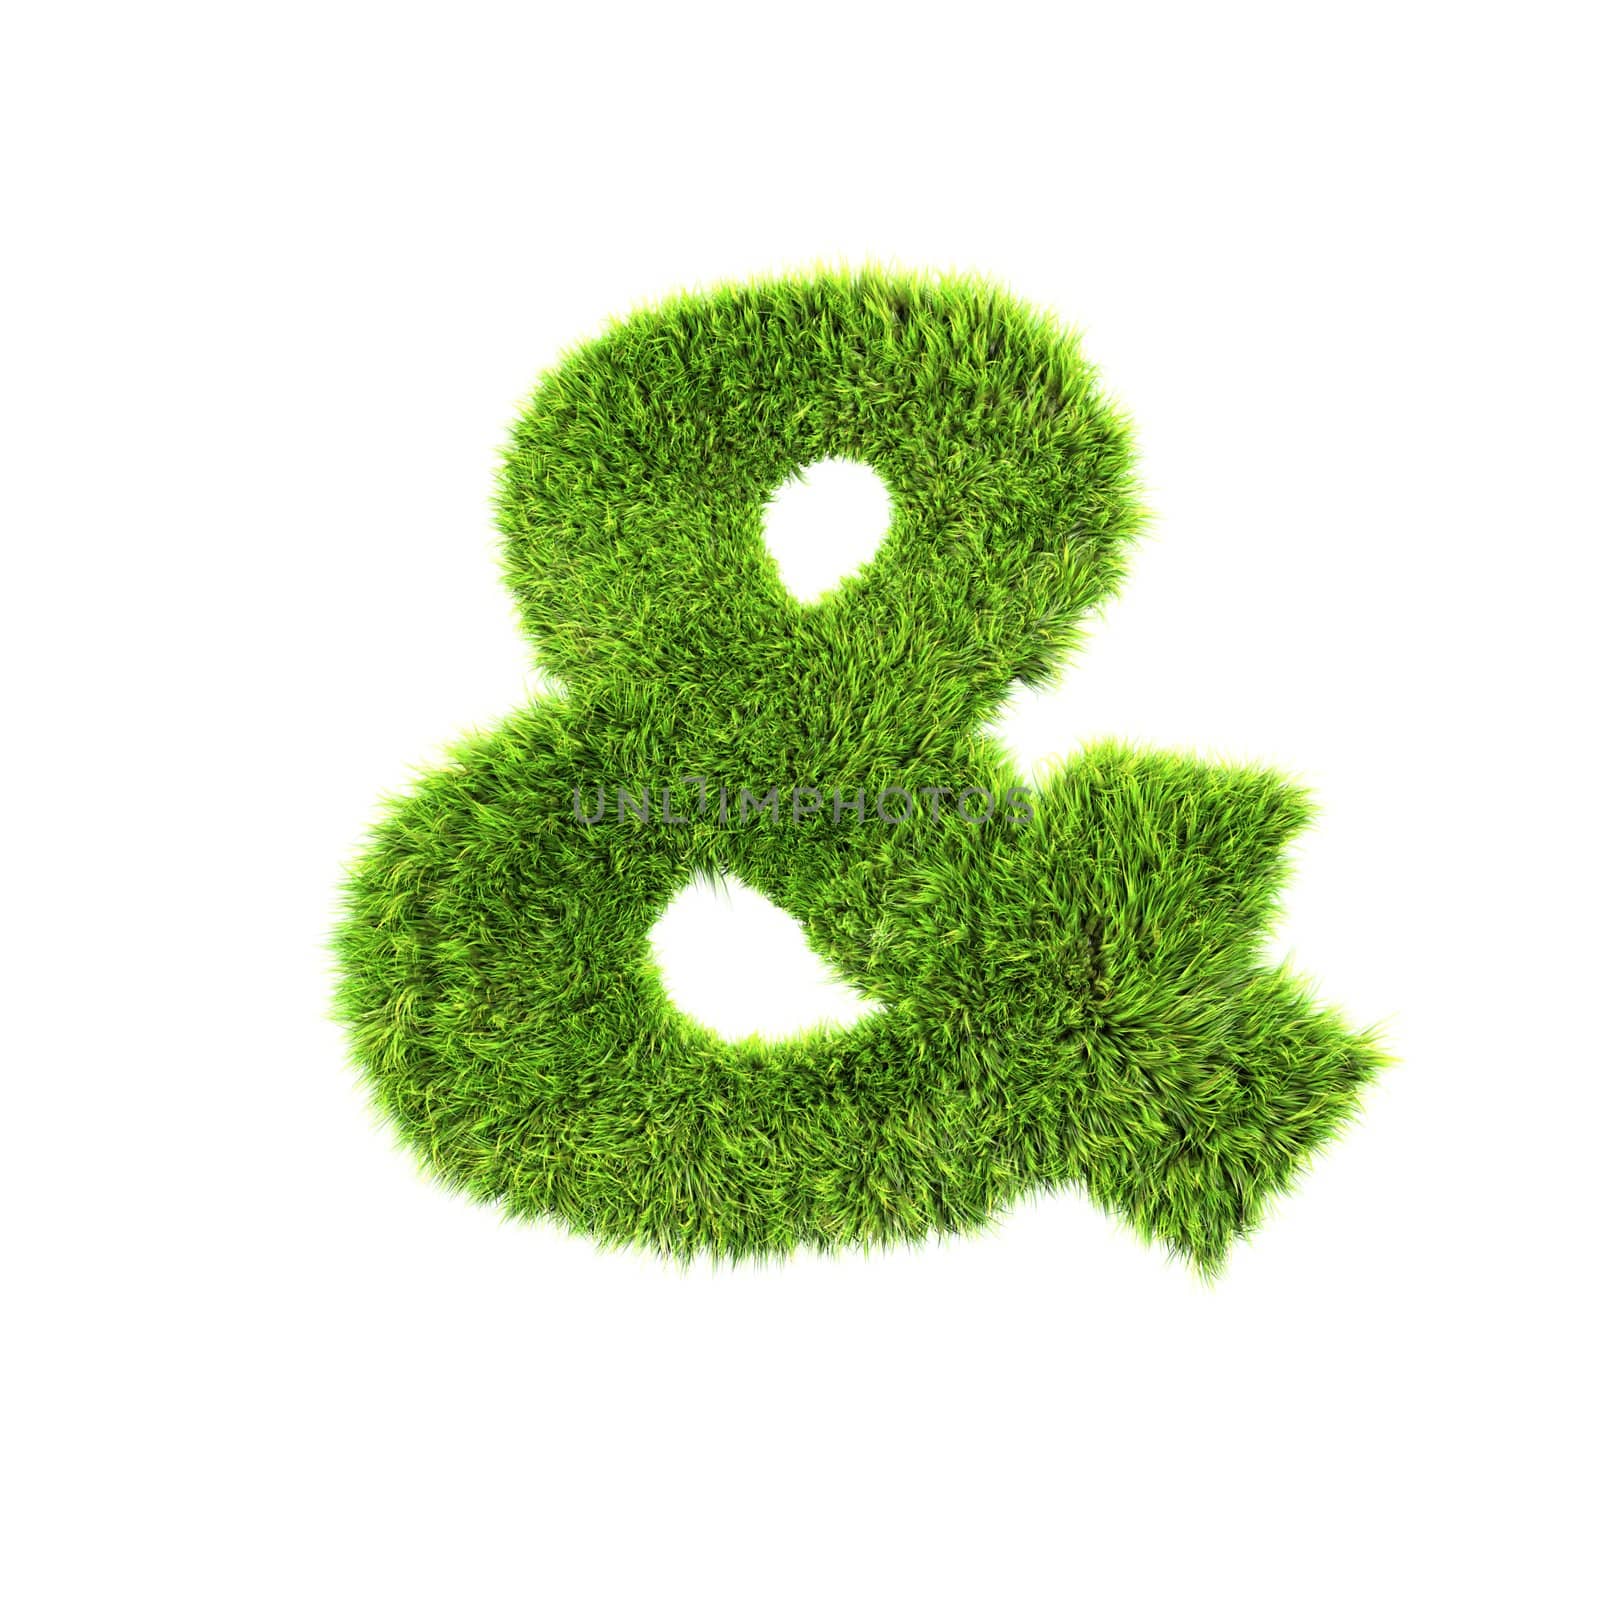 3d grass sign isolated on white background - &